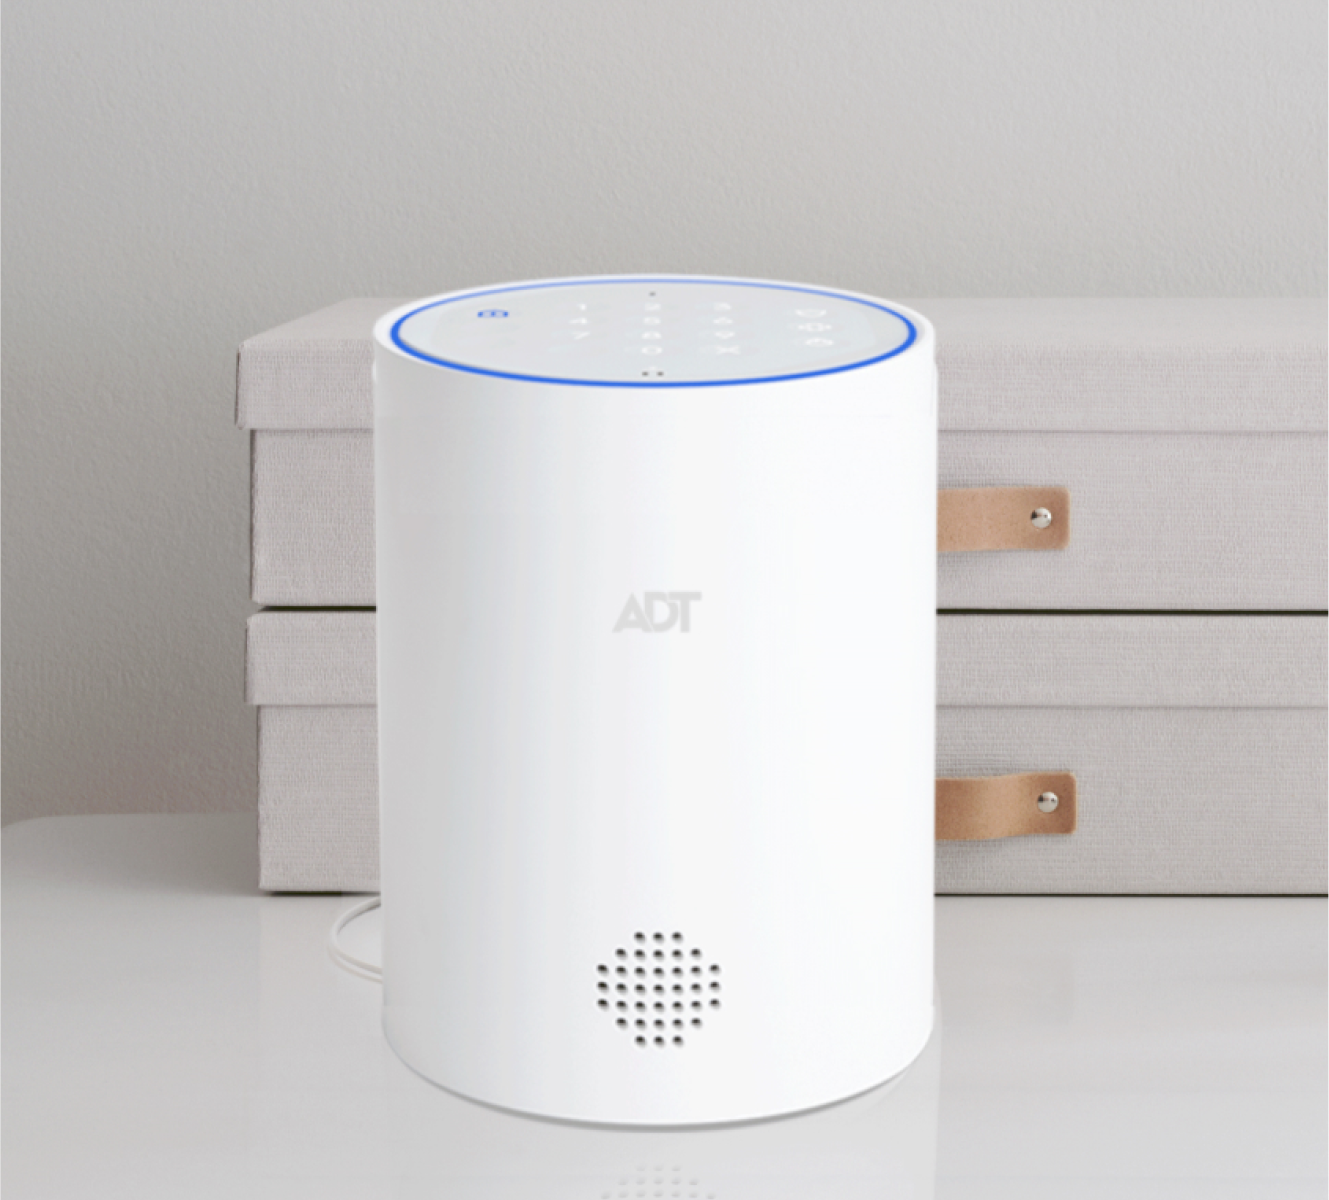 ADT Smart Home Hub on a table with drawers behind it